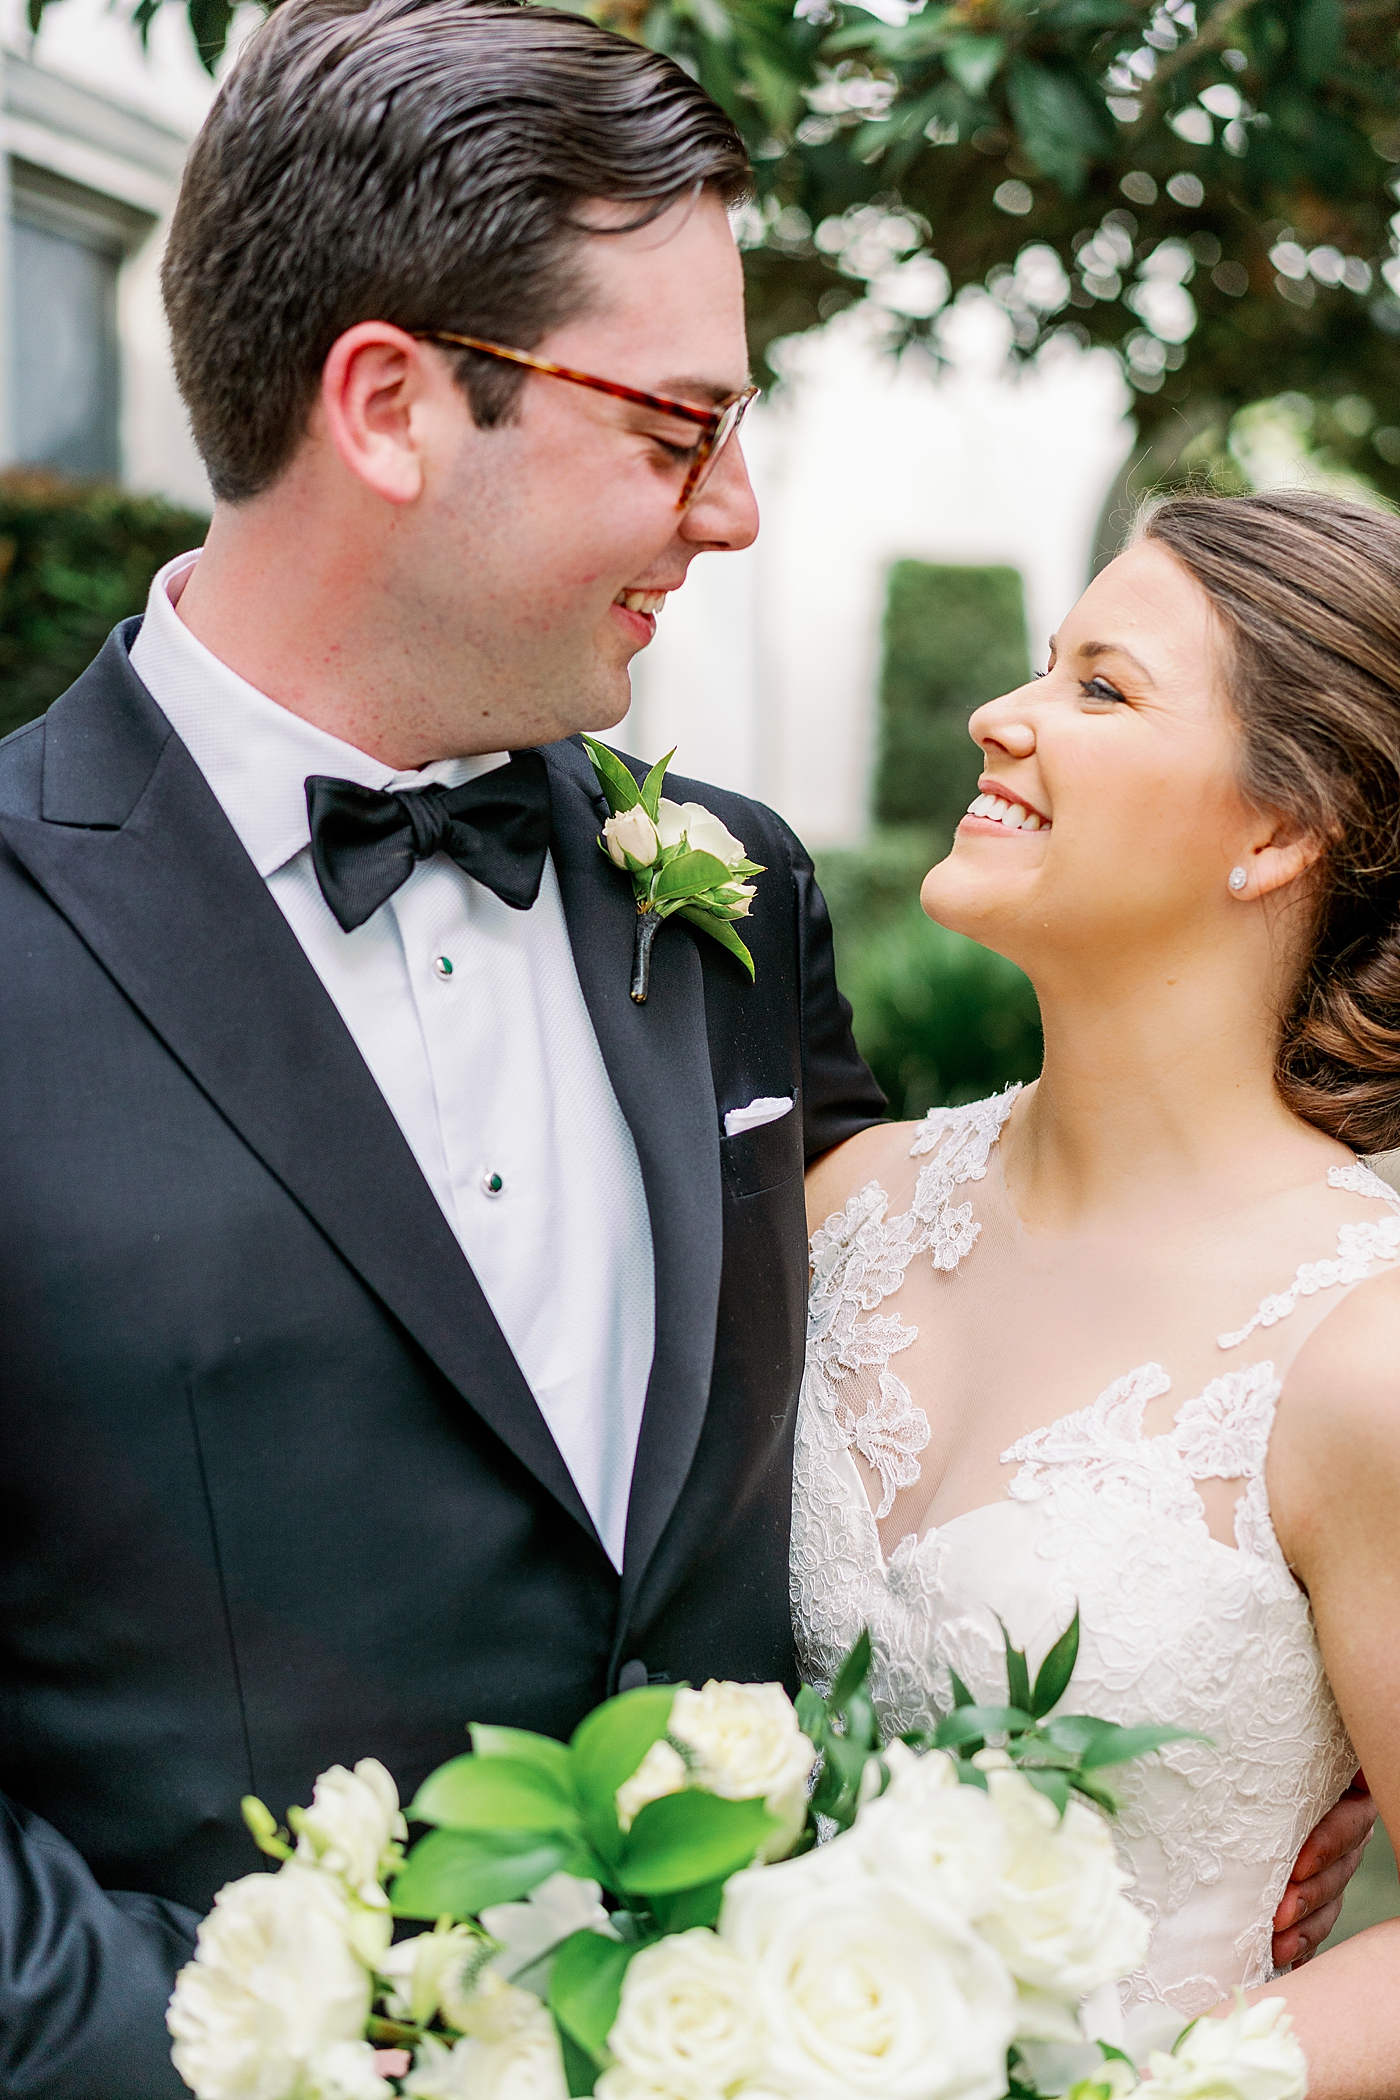 Bride and groom smiling at each other after their first look | Photo by Annie Laura Photography